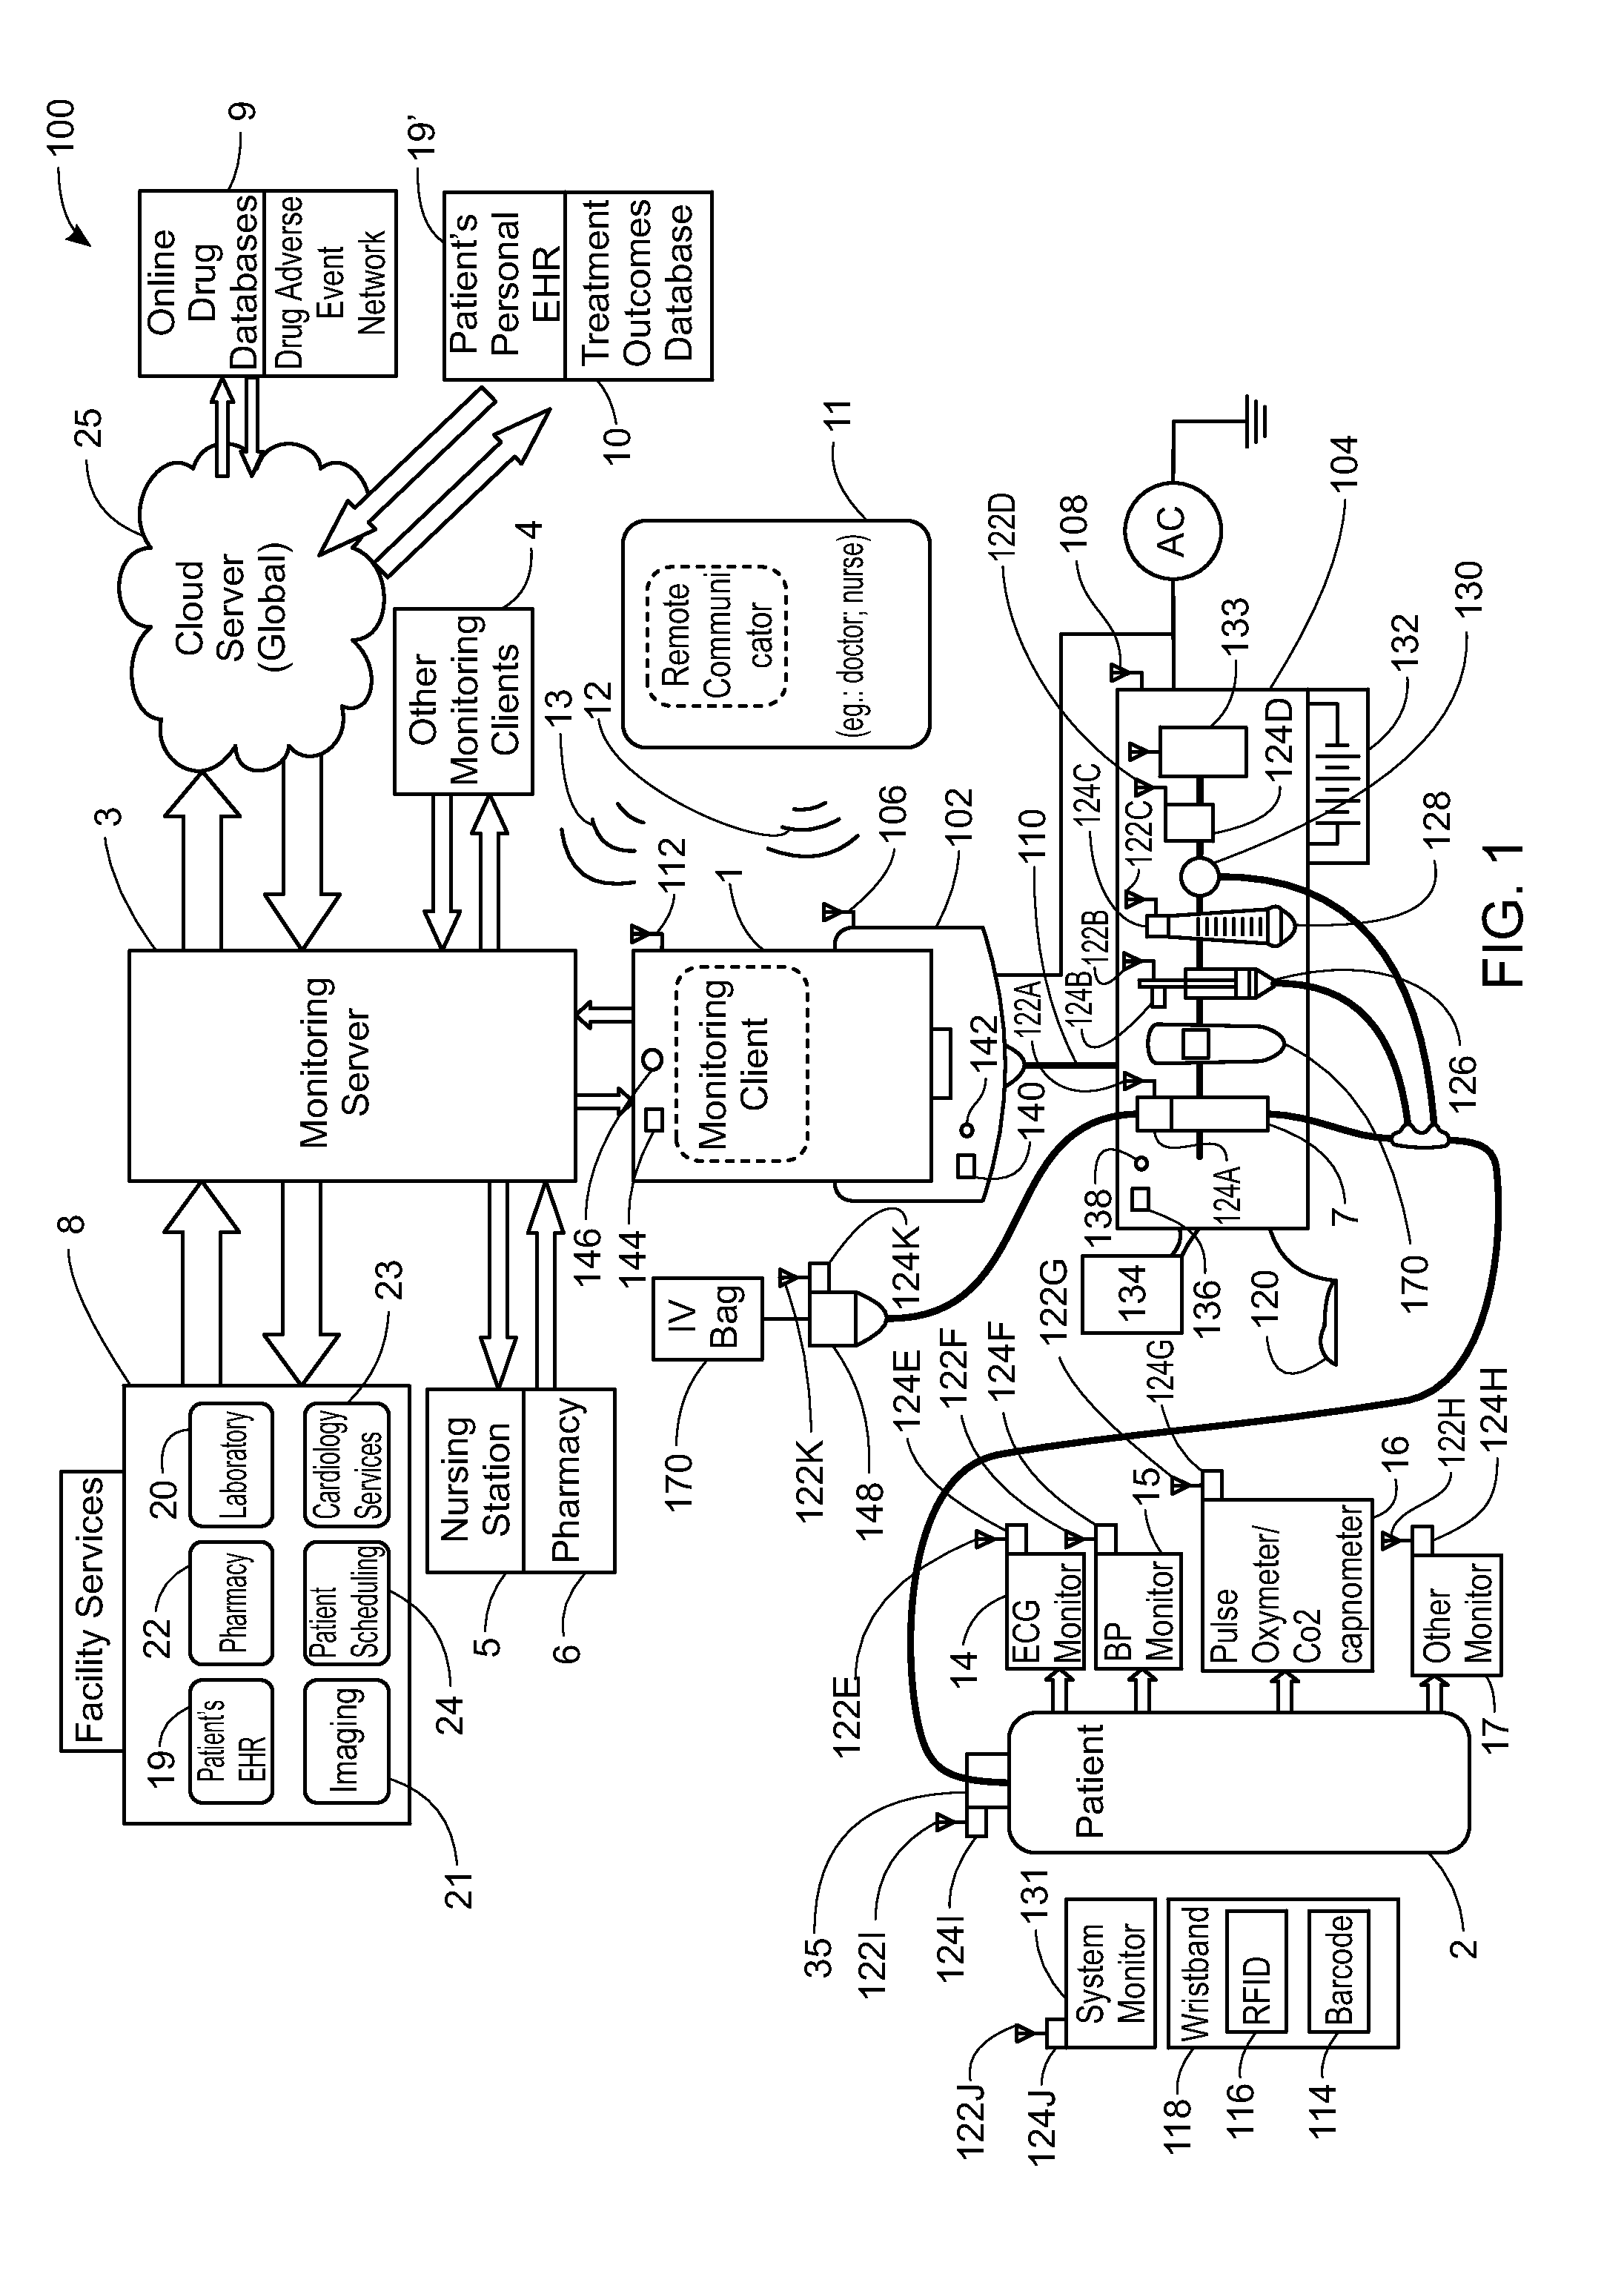 System, Method and Apparatus for Electronic Patient Care